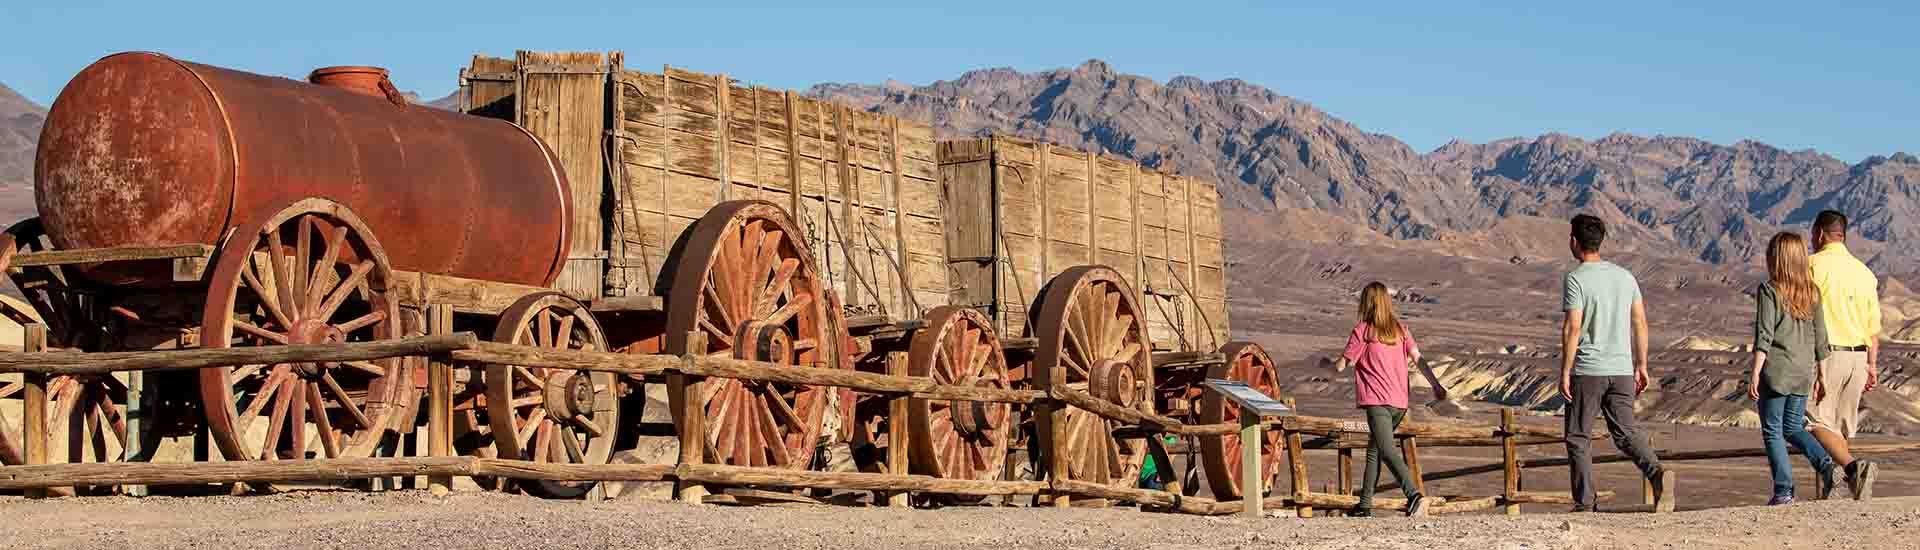 Pink Adventure Tours Death Valley Tour guests approaching the Twenty-Mule Team Wagon replica, Harmony Borax Works, Death Valley